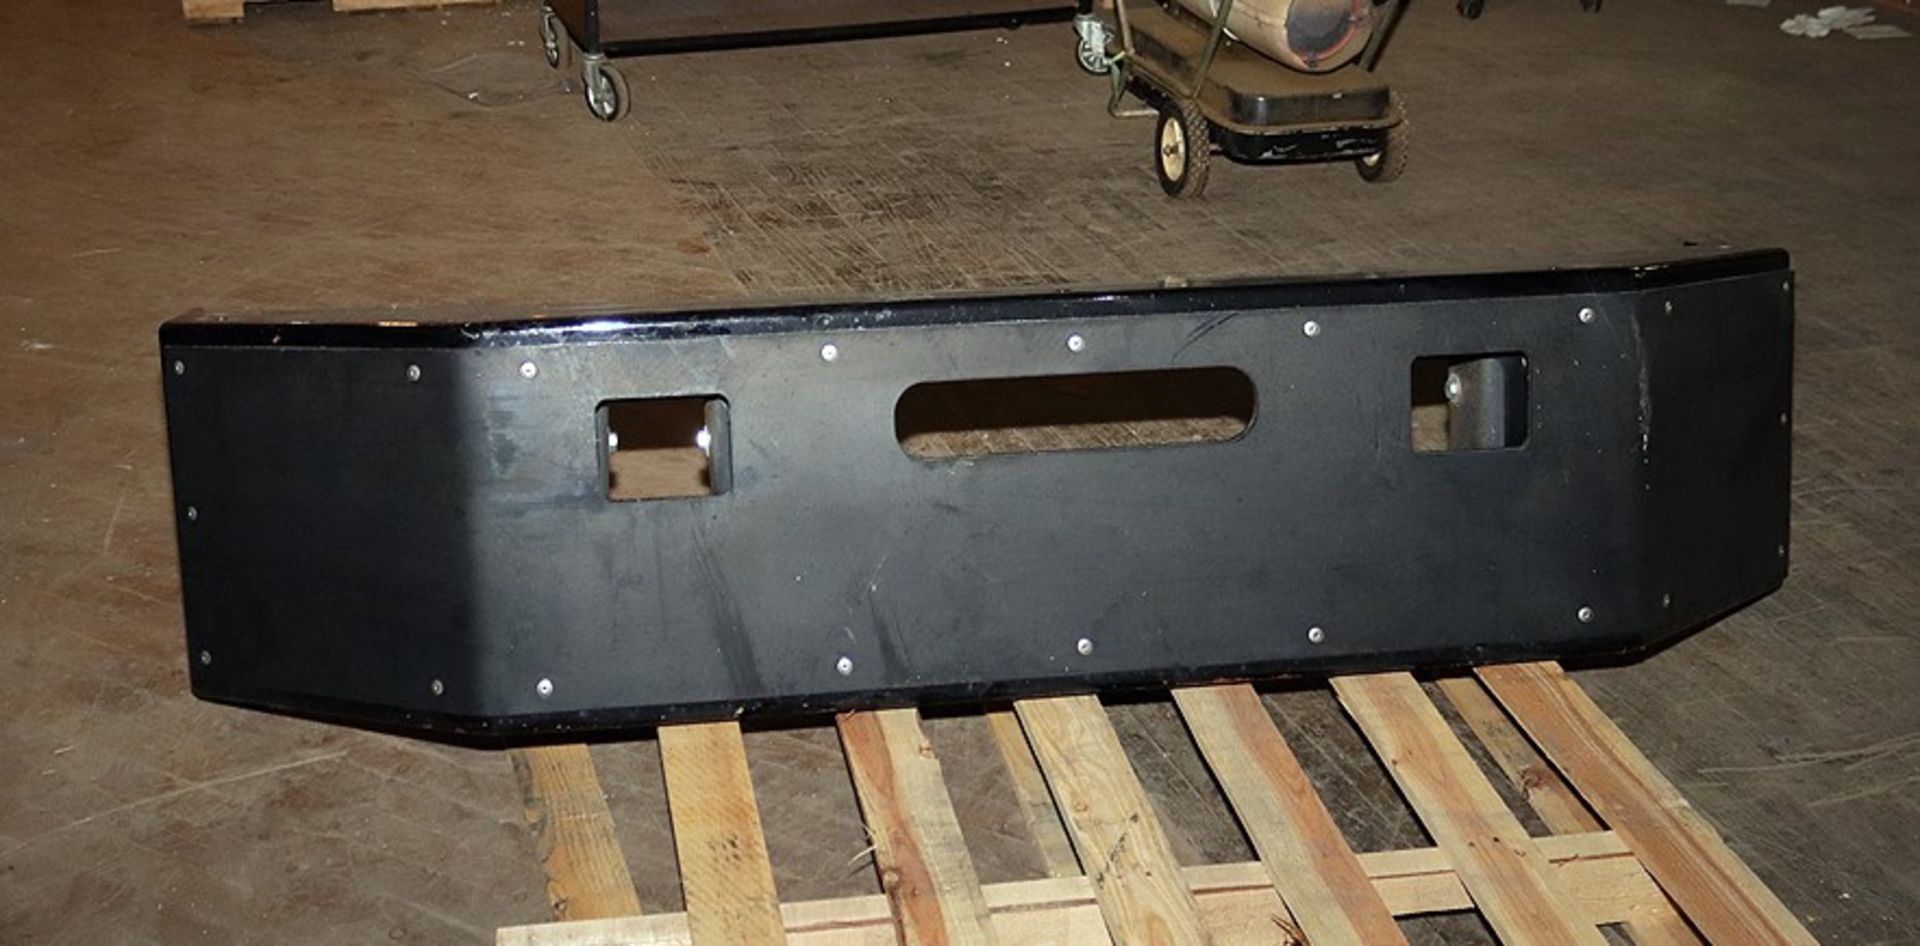 Bumper, came off of a Ford F350 pickup truck